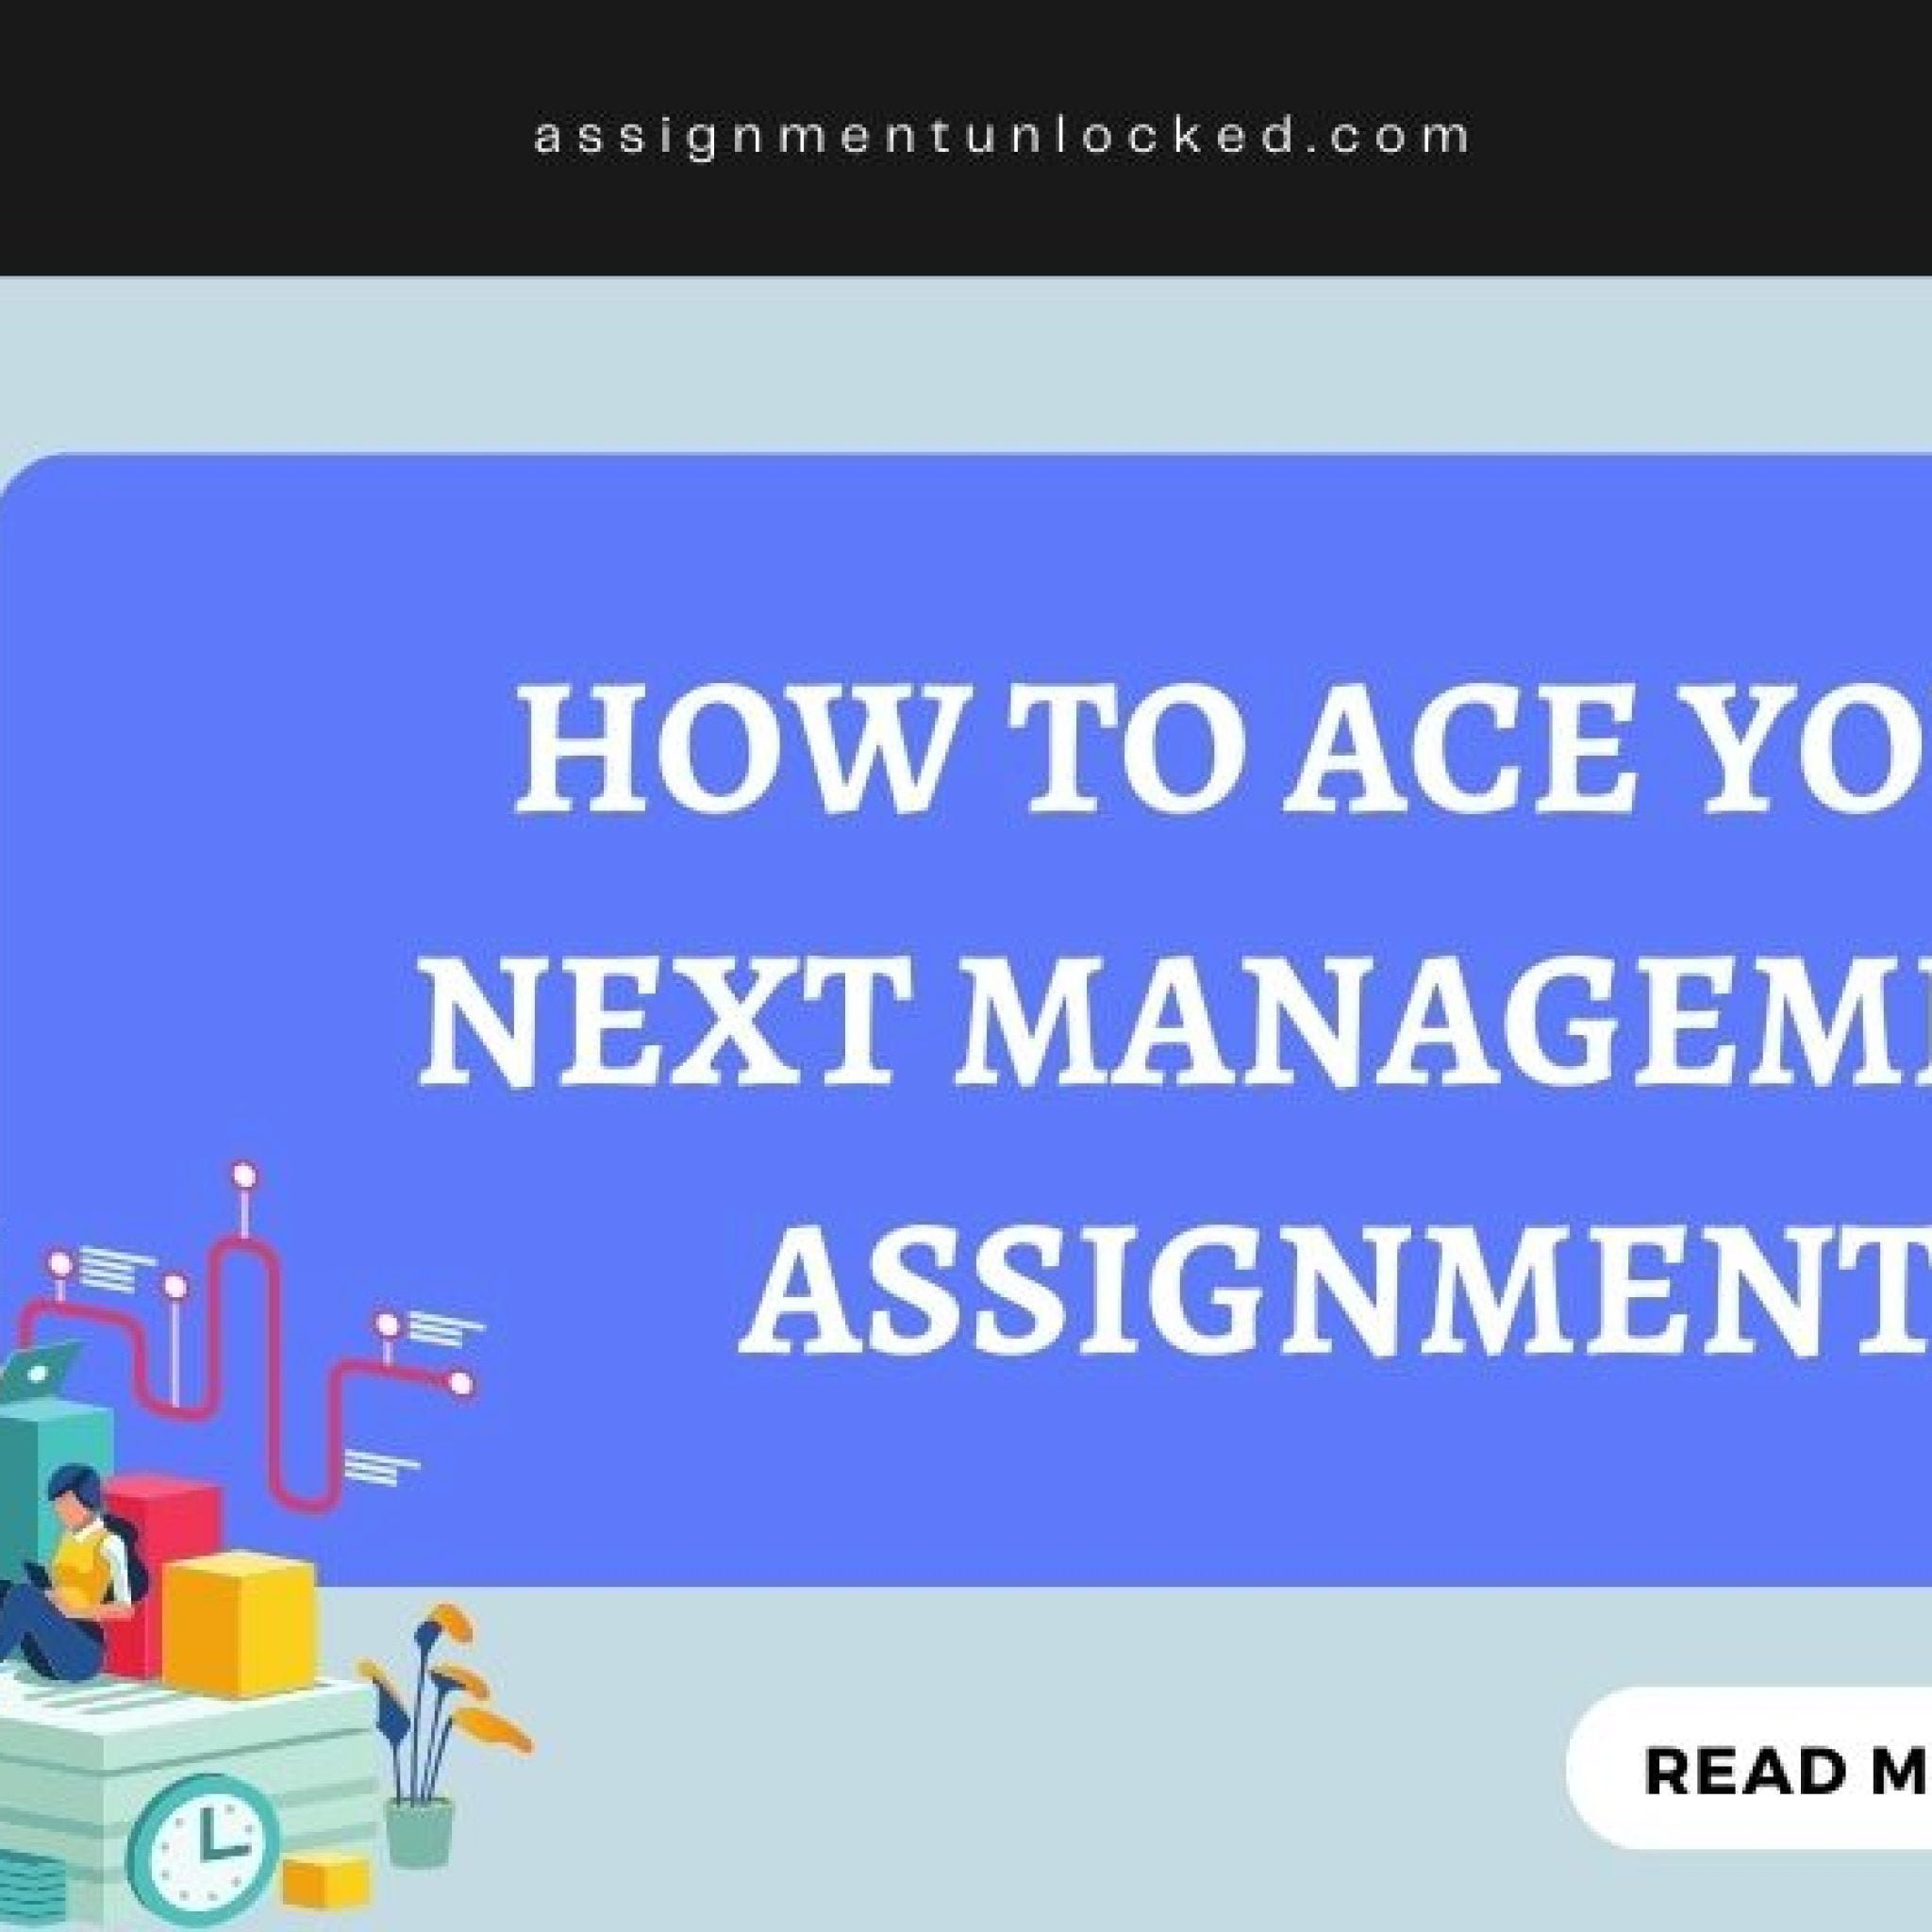 ace your management assignment help